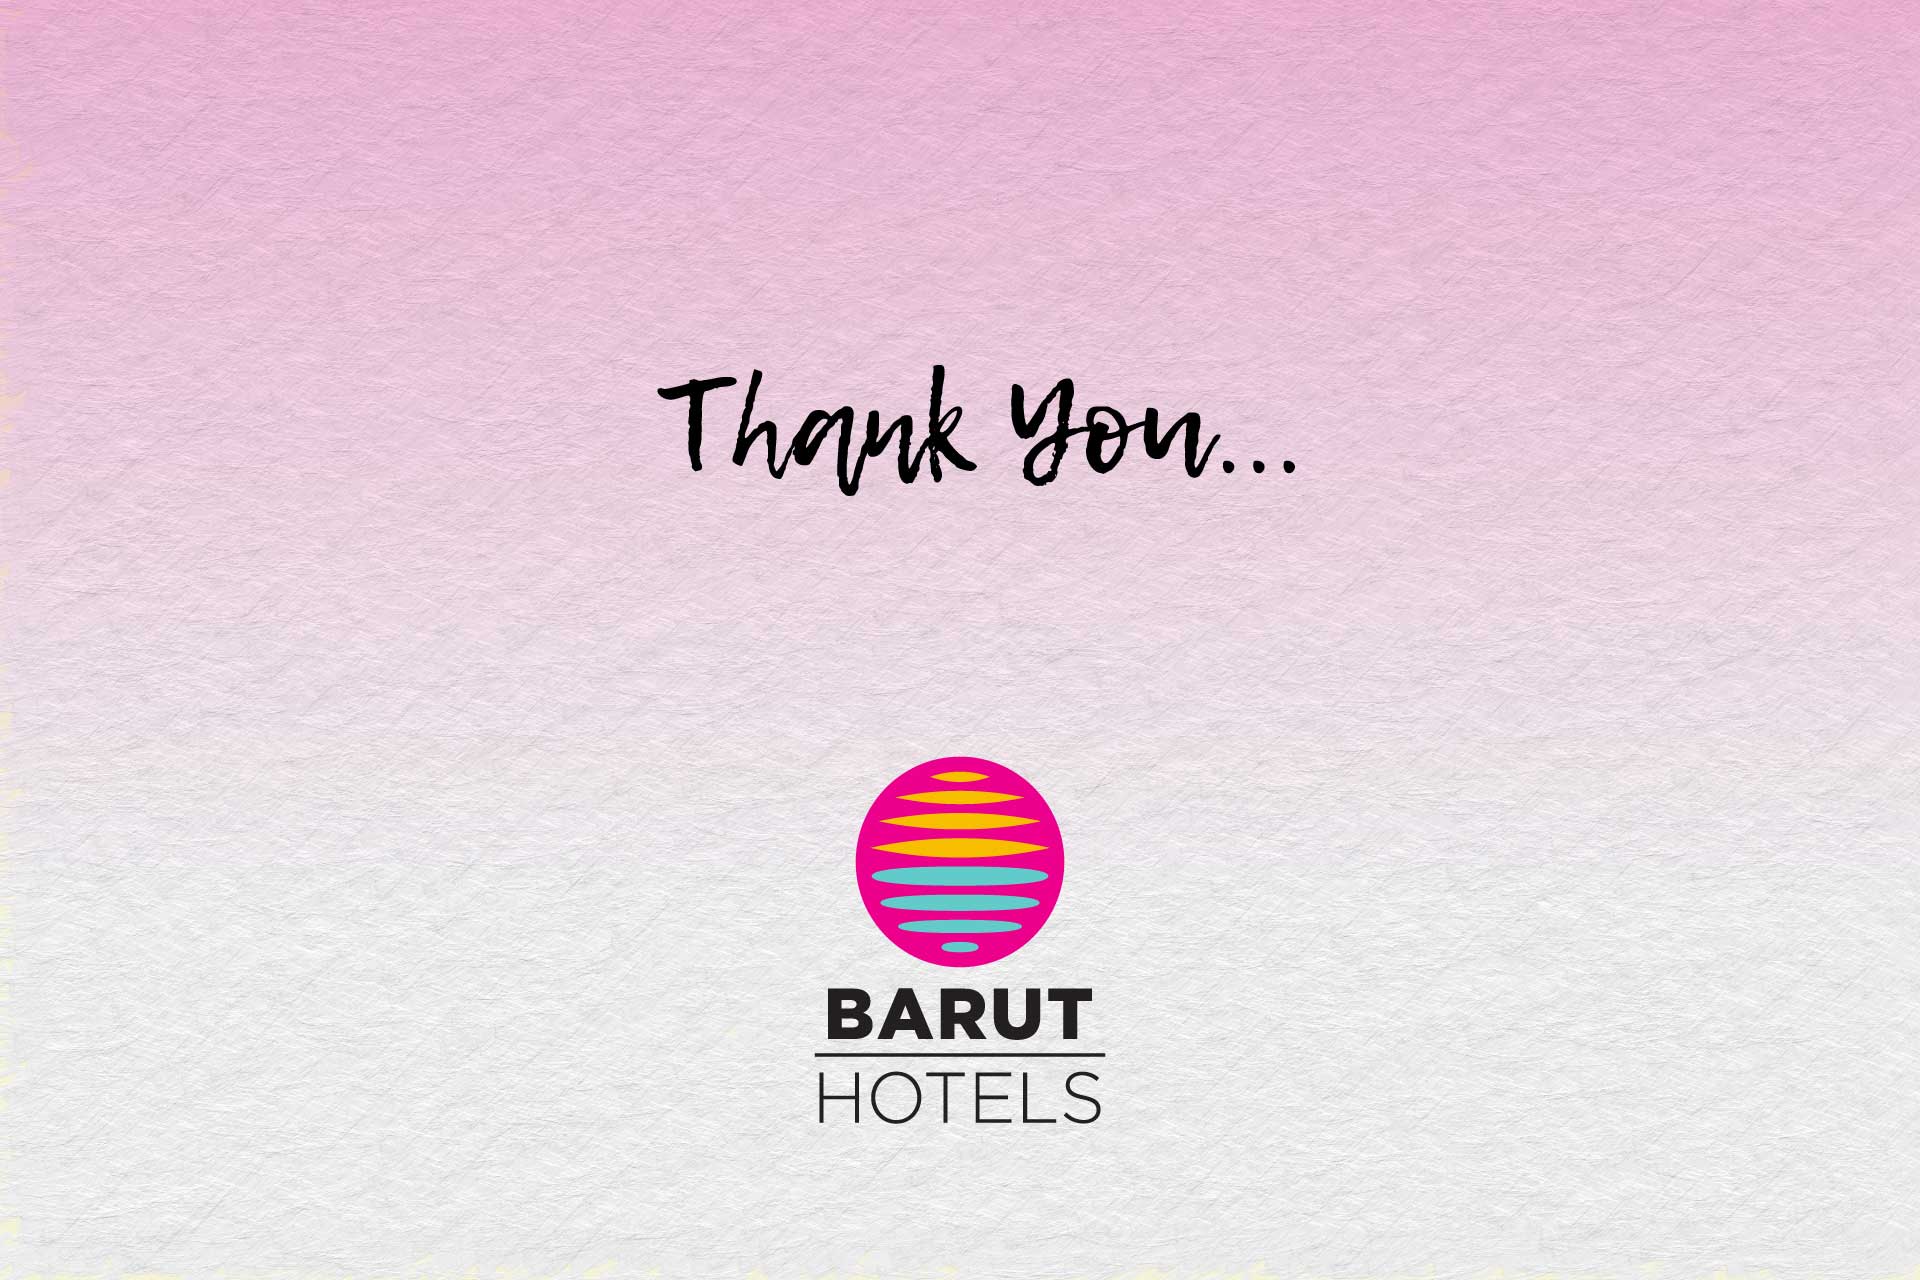 THANK YOU FOR YOUR RELIANCE ON BARUT HOTELS AND TURKISH TOURISM